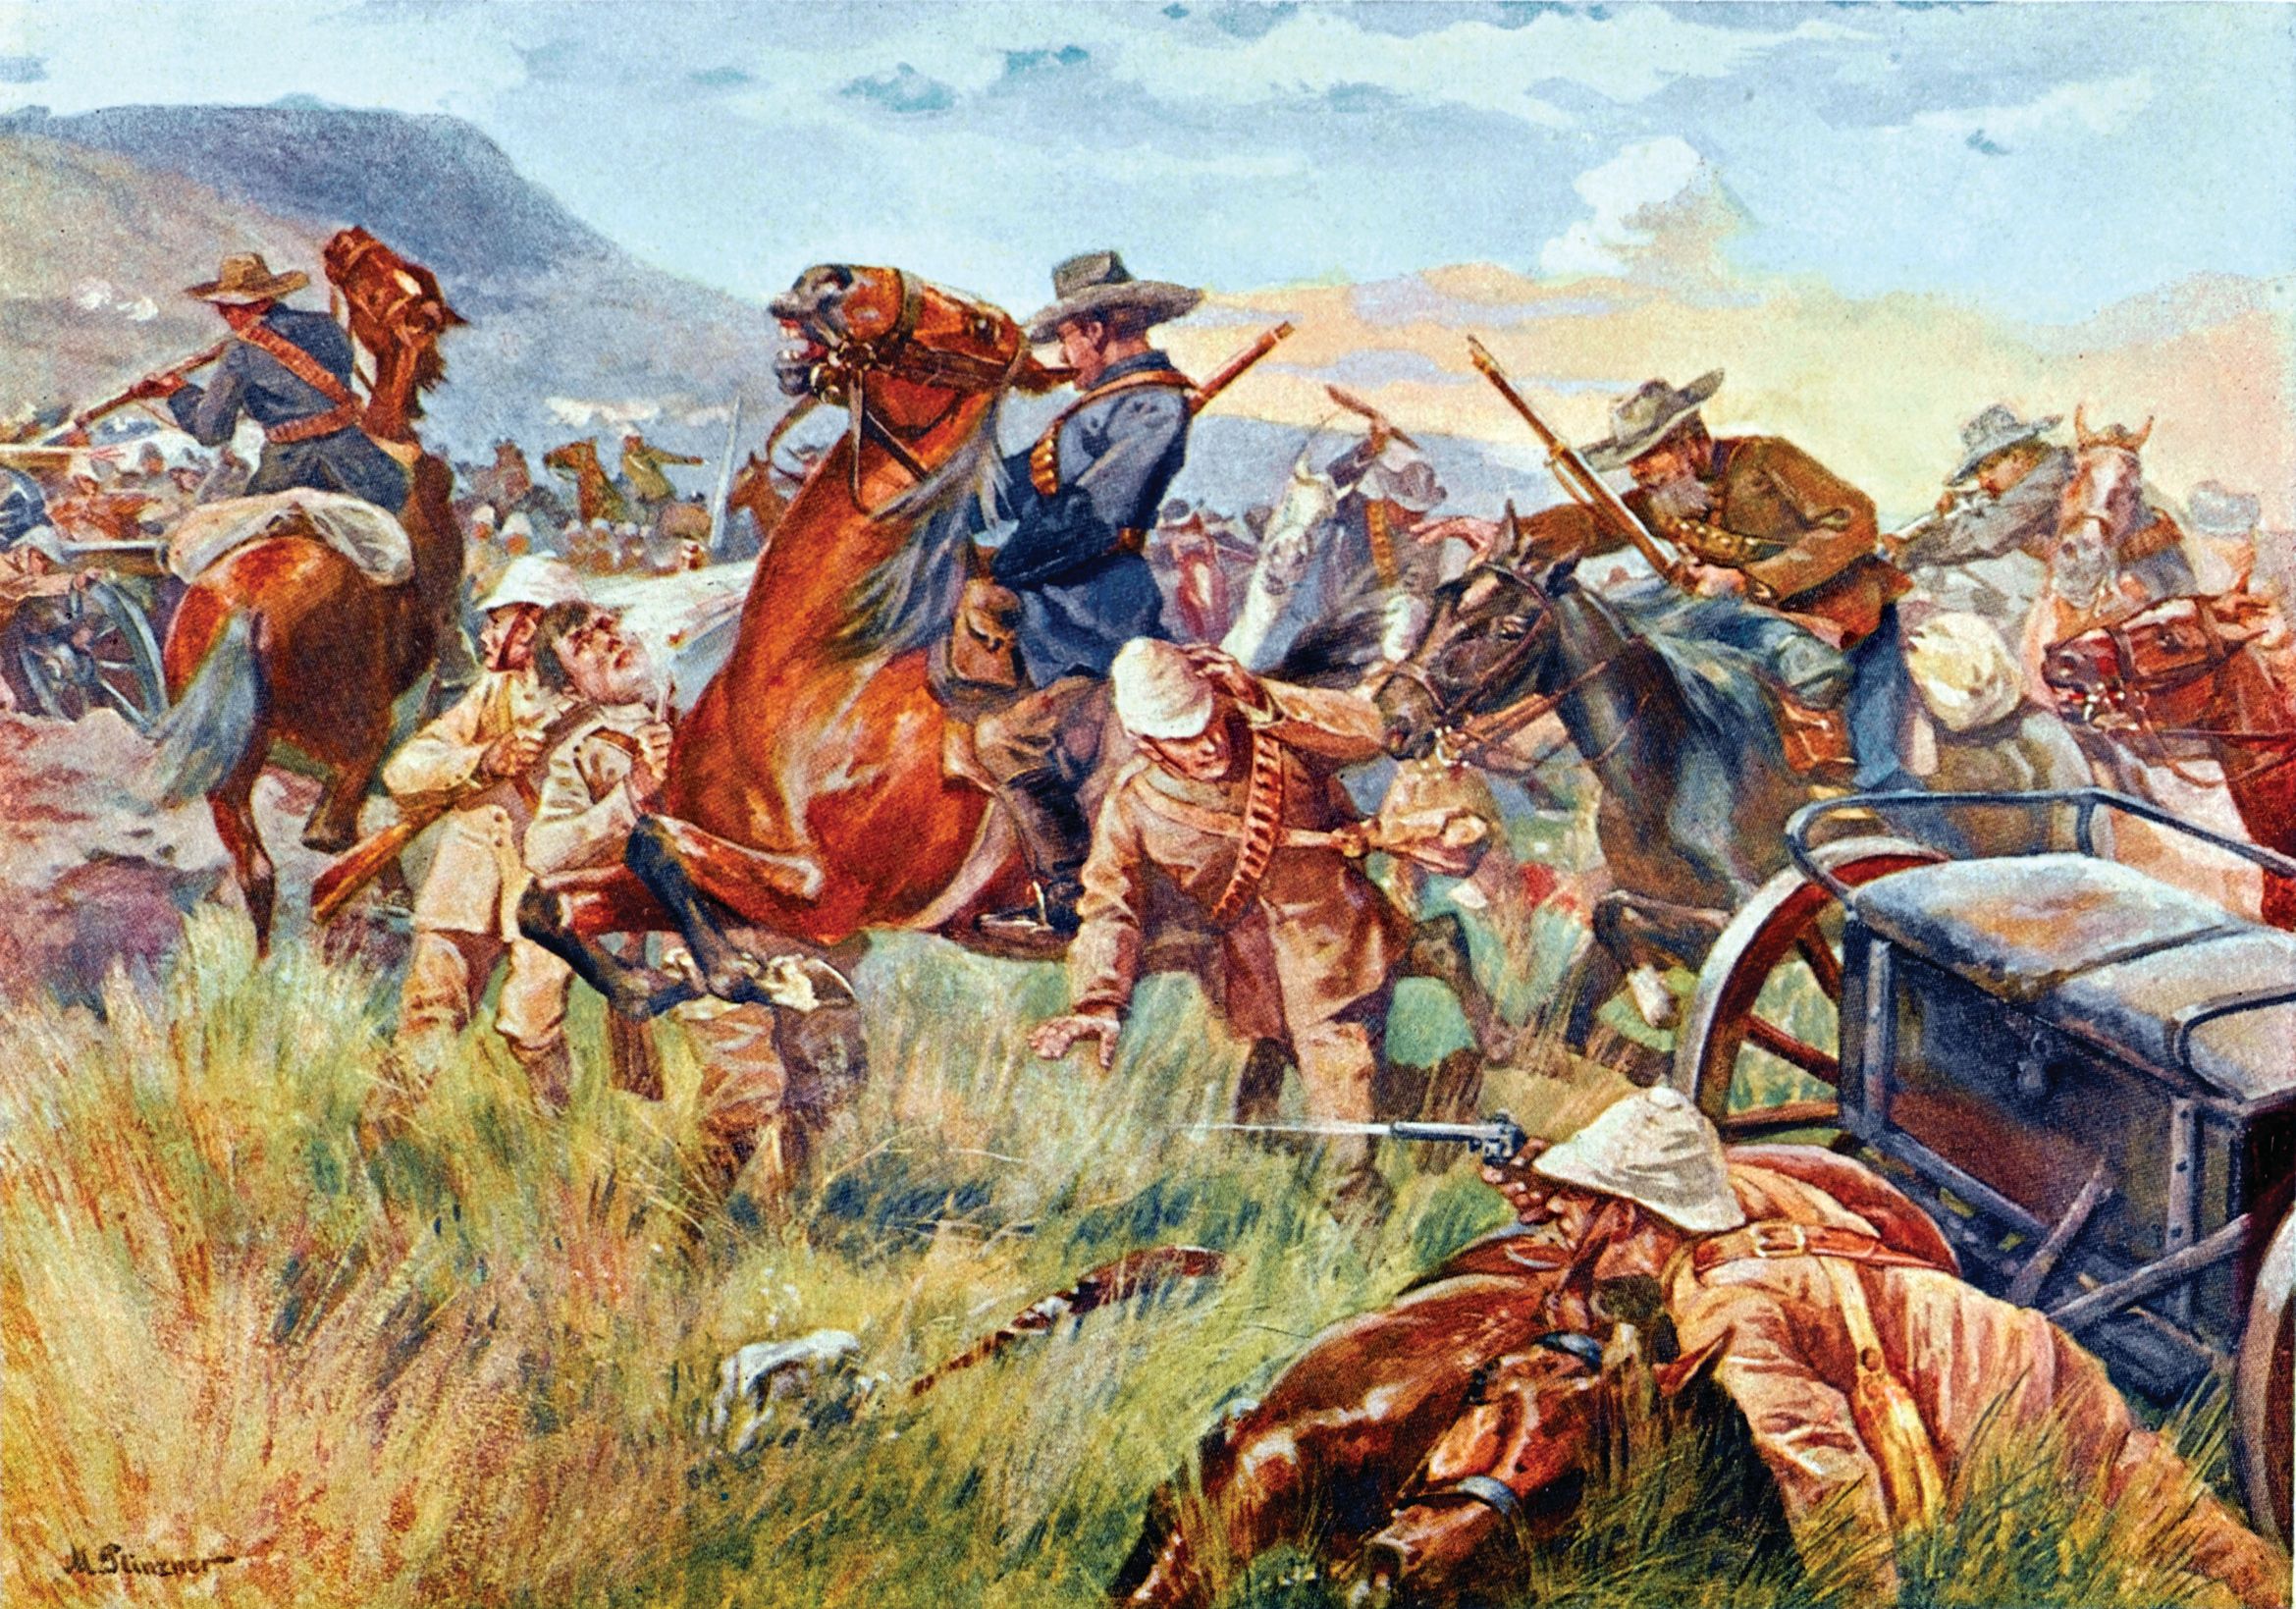 Having routed the British, the Boers set about recovering the weapons and equipment abandoned by the British during their rapid withdrawal. The defeats of Black Week compelled the British to undertake sweeping military reforms in order to prevail over the Boers.